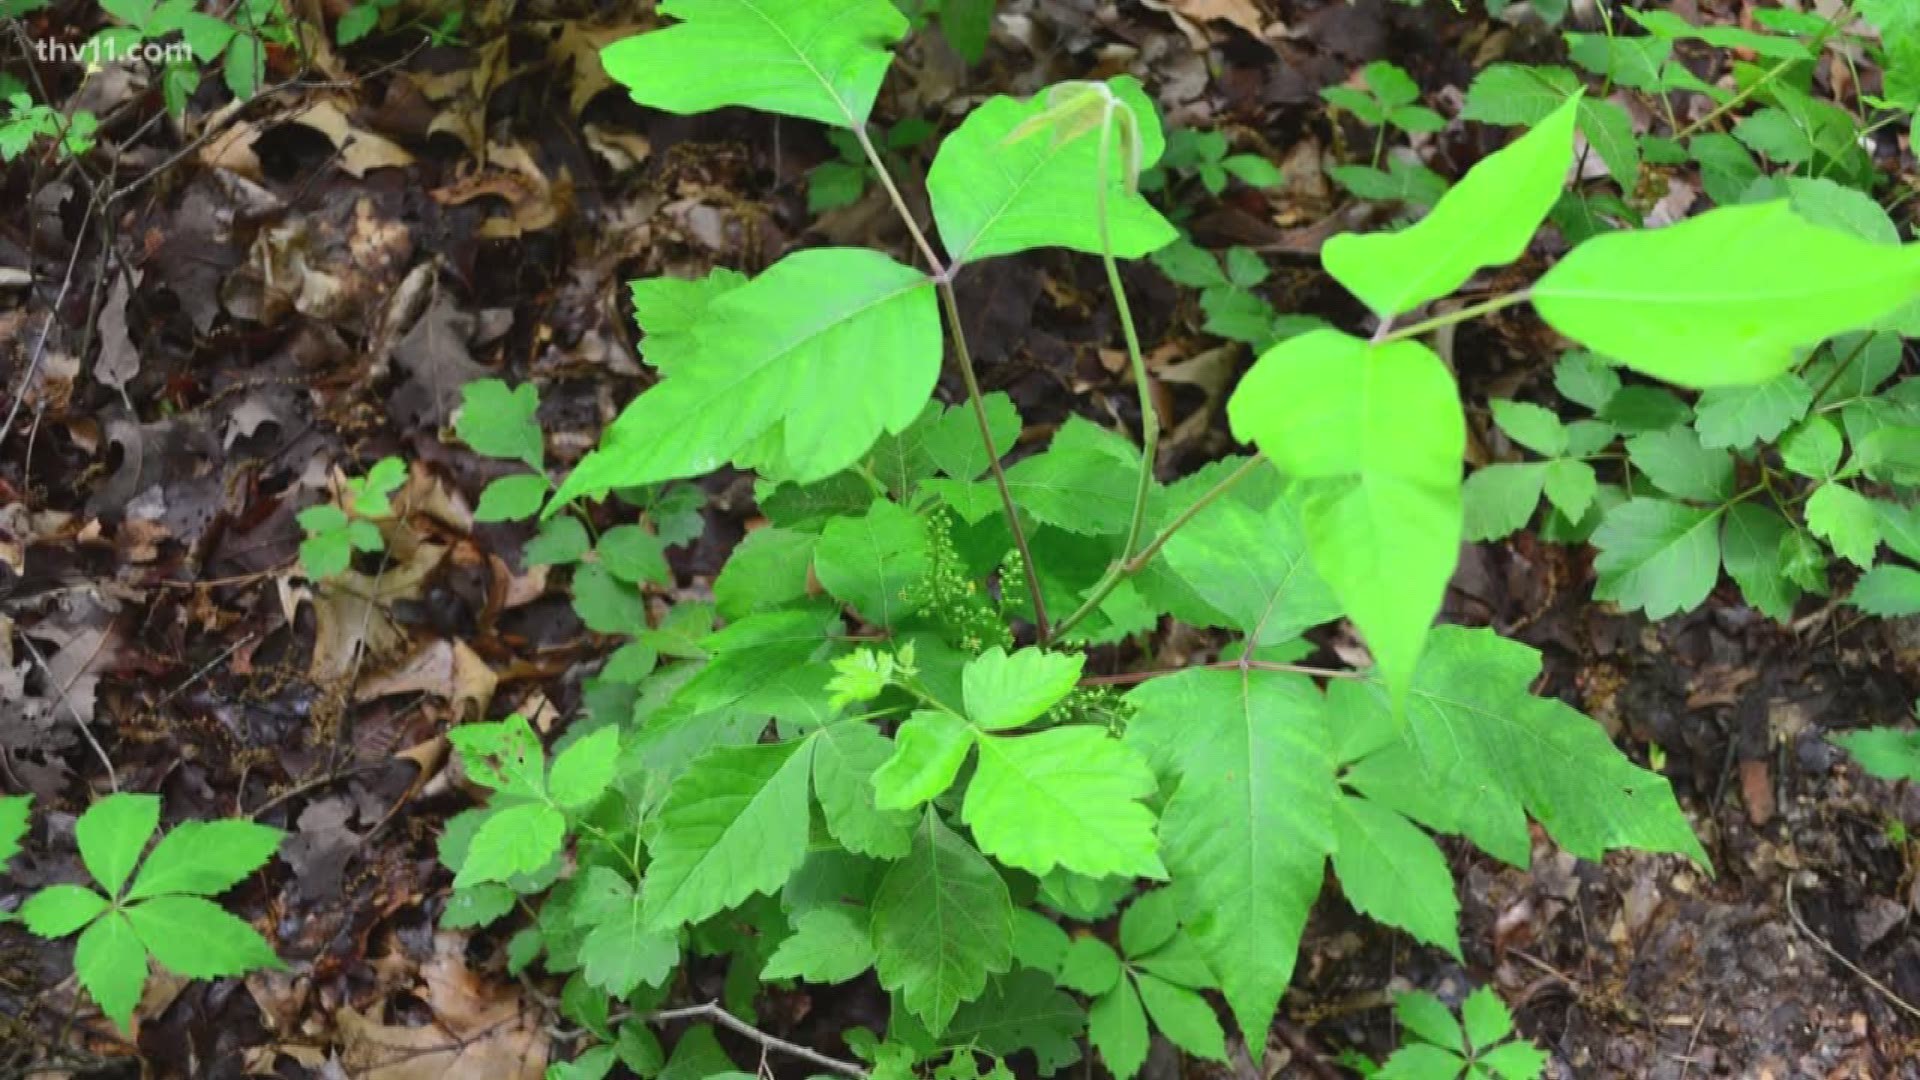 Debunking poison ivy home remedies